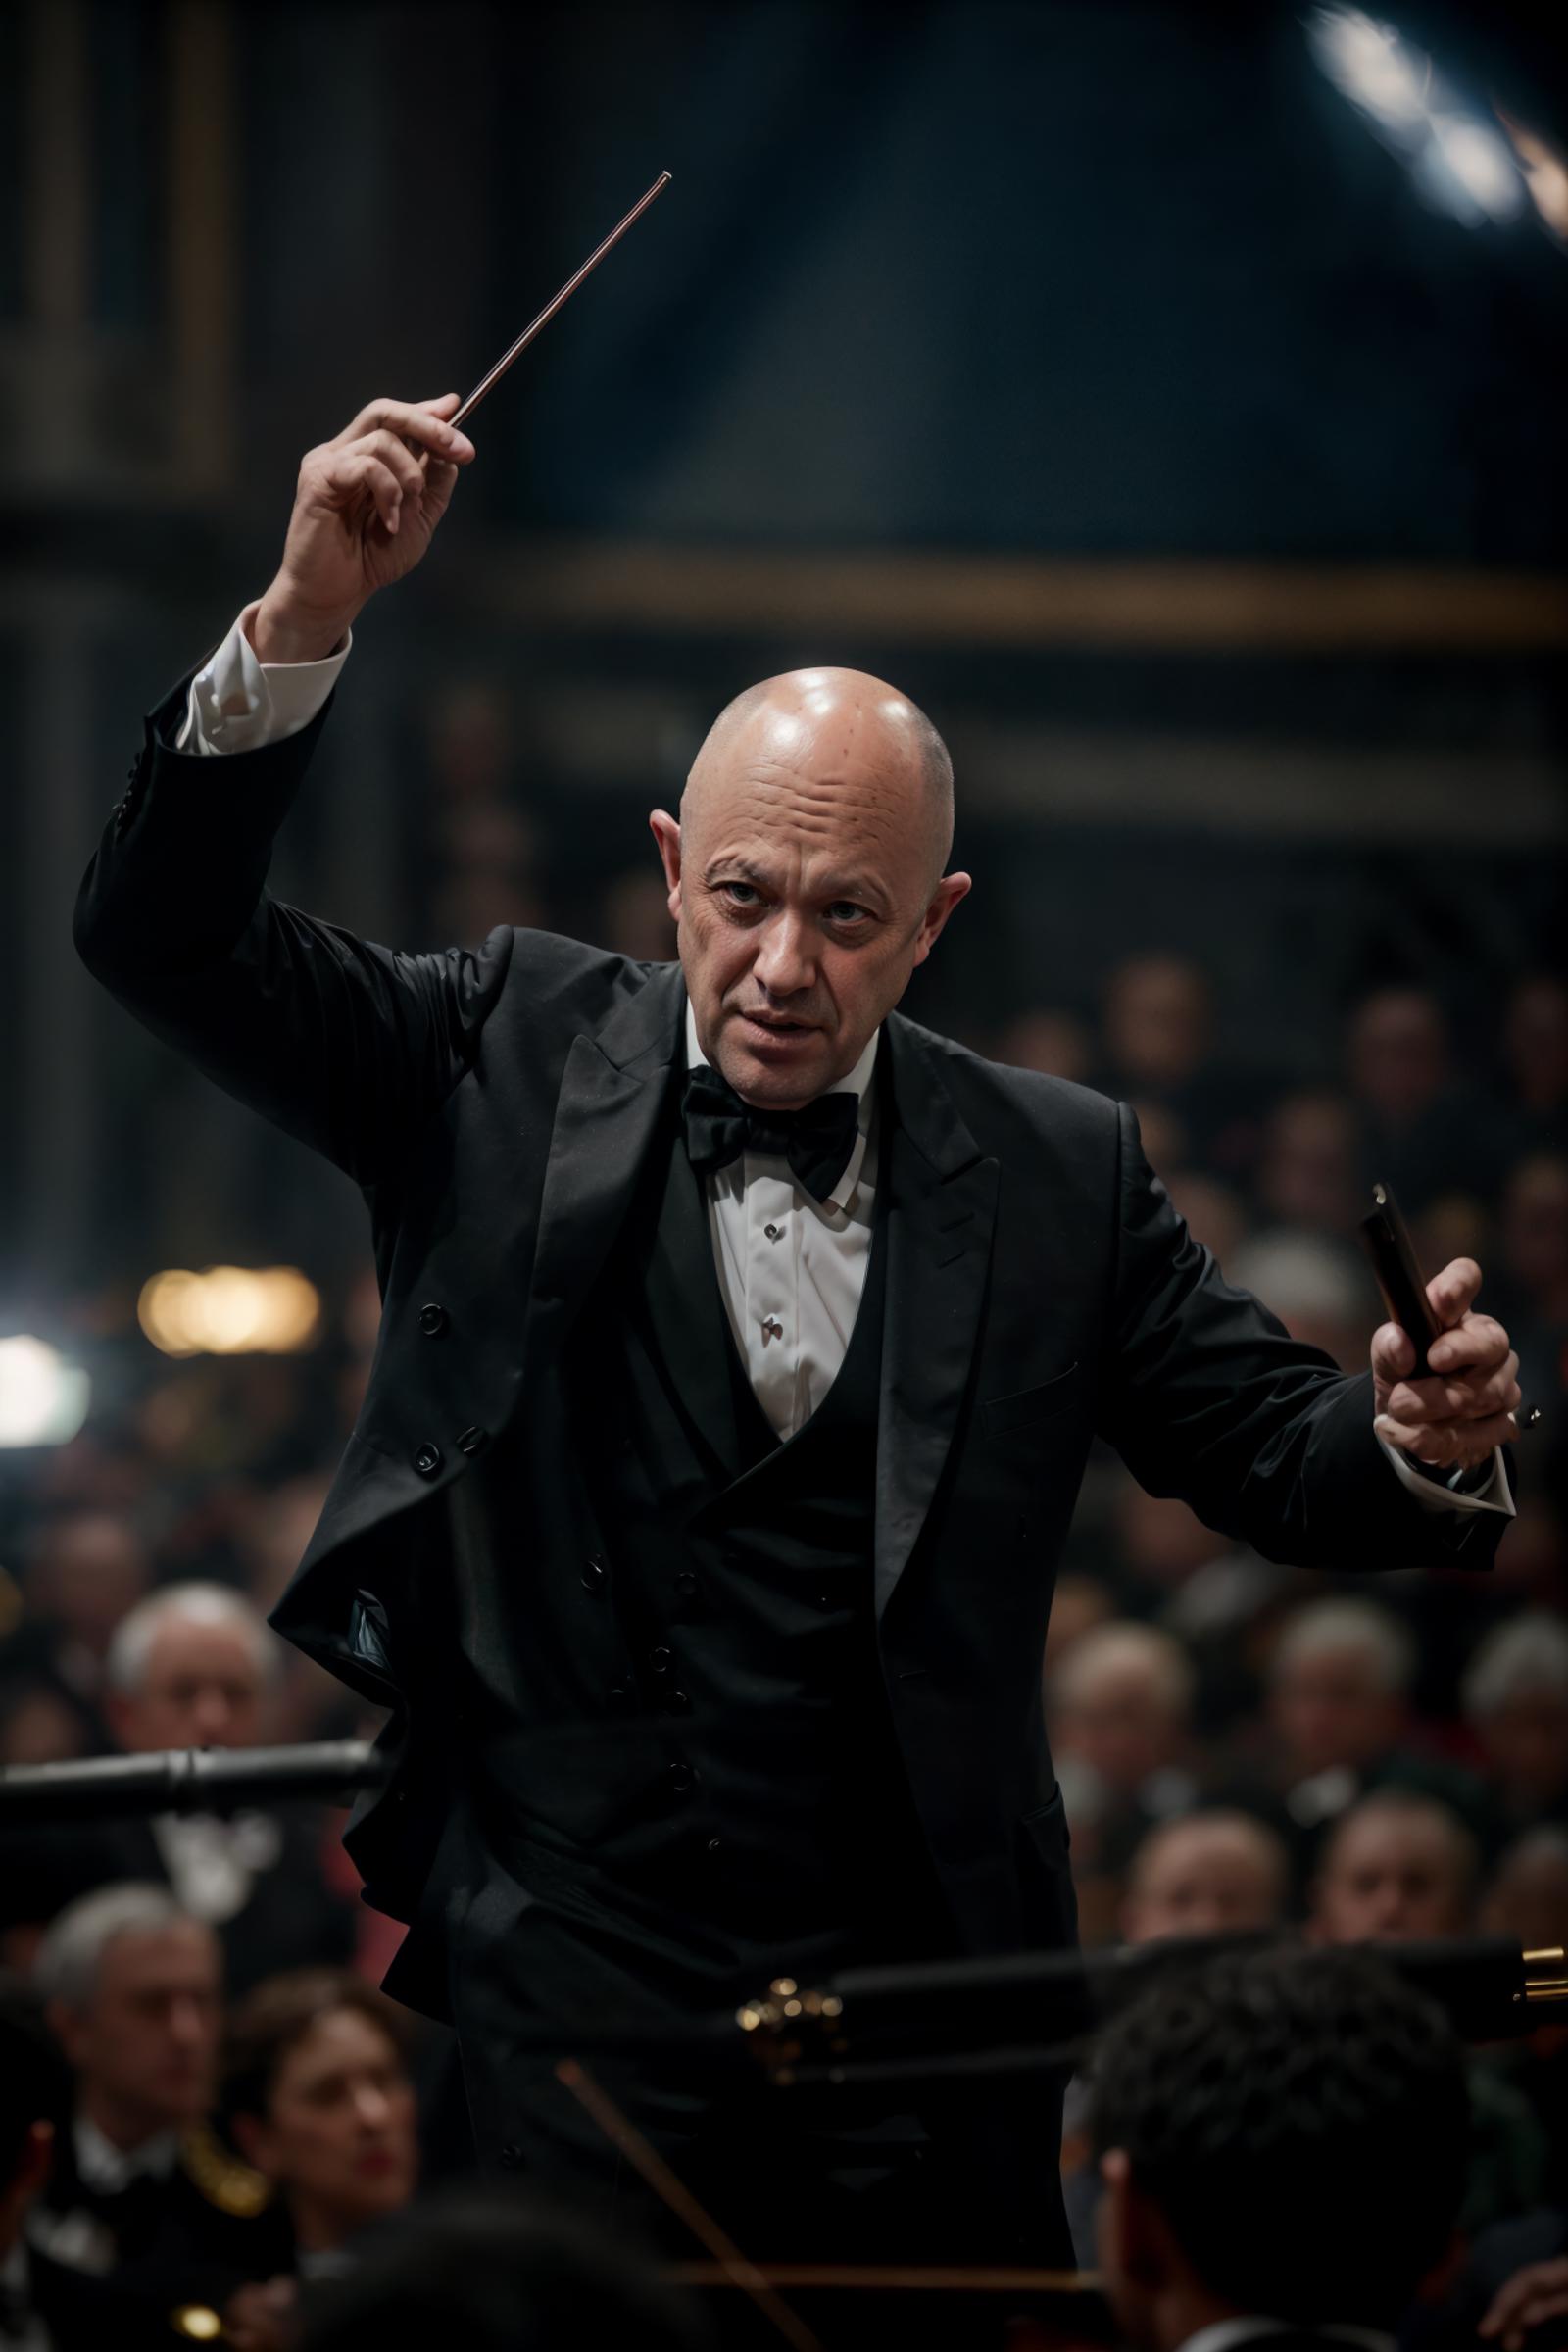 A Conductor Leads a Symphony Orchestra, Directing the Music with Passion and Precision